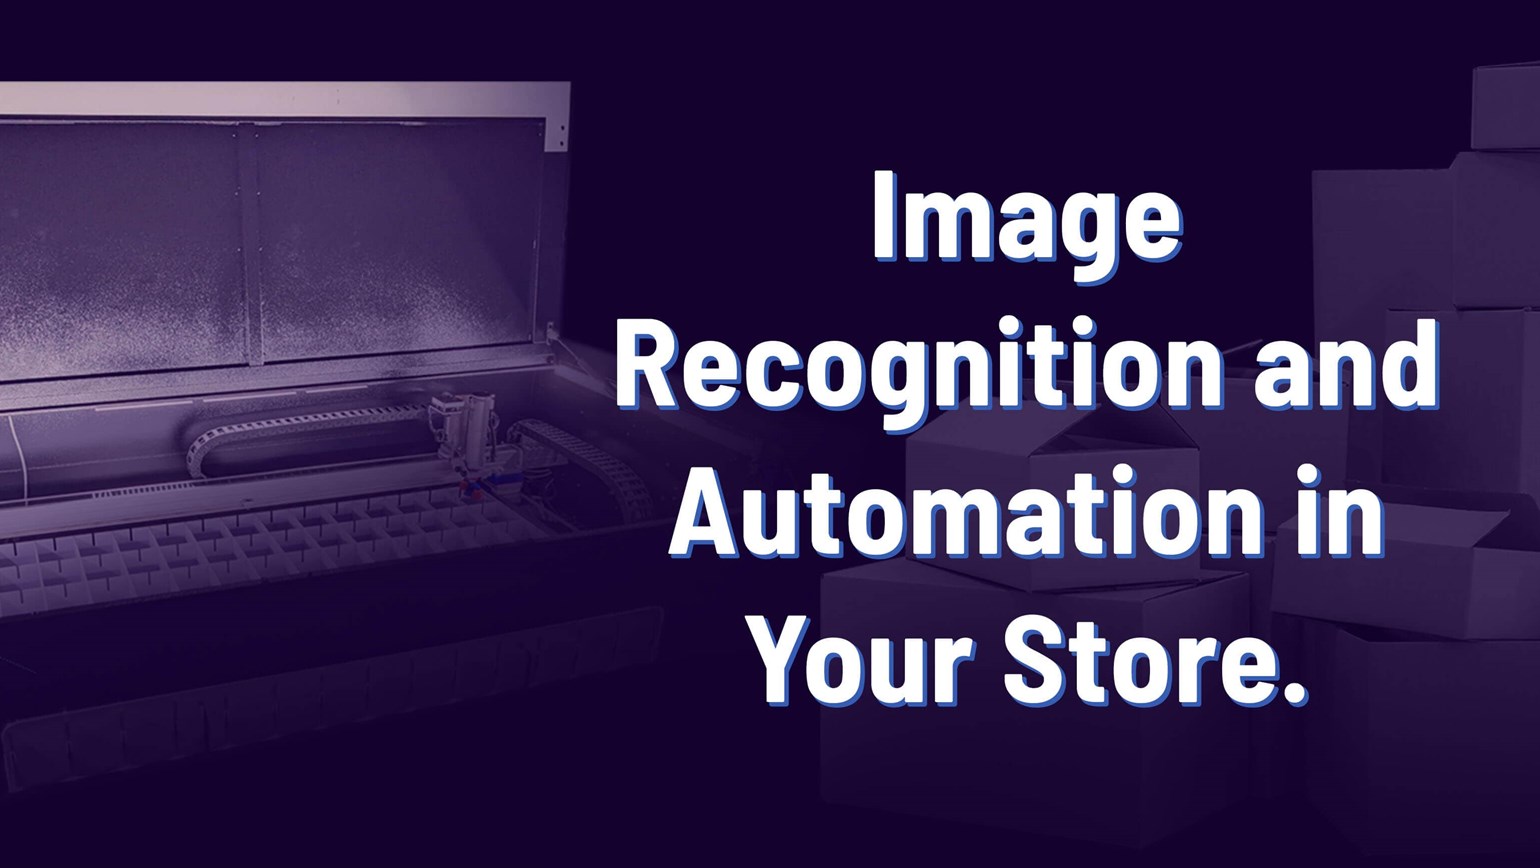 The Roca Sorter: Image Recognition and Automation in Your Store